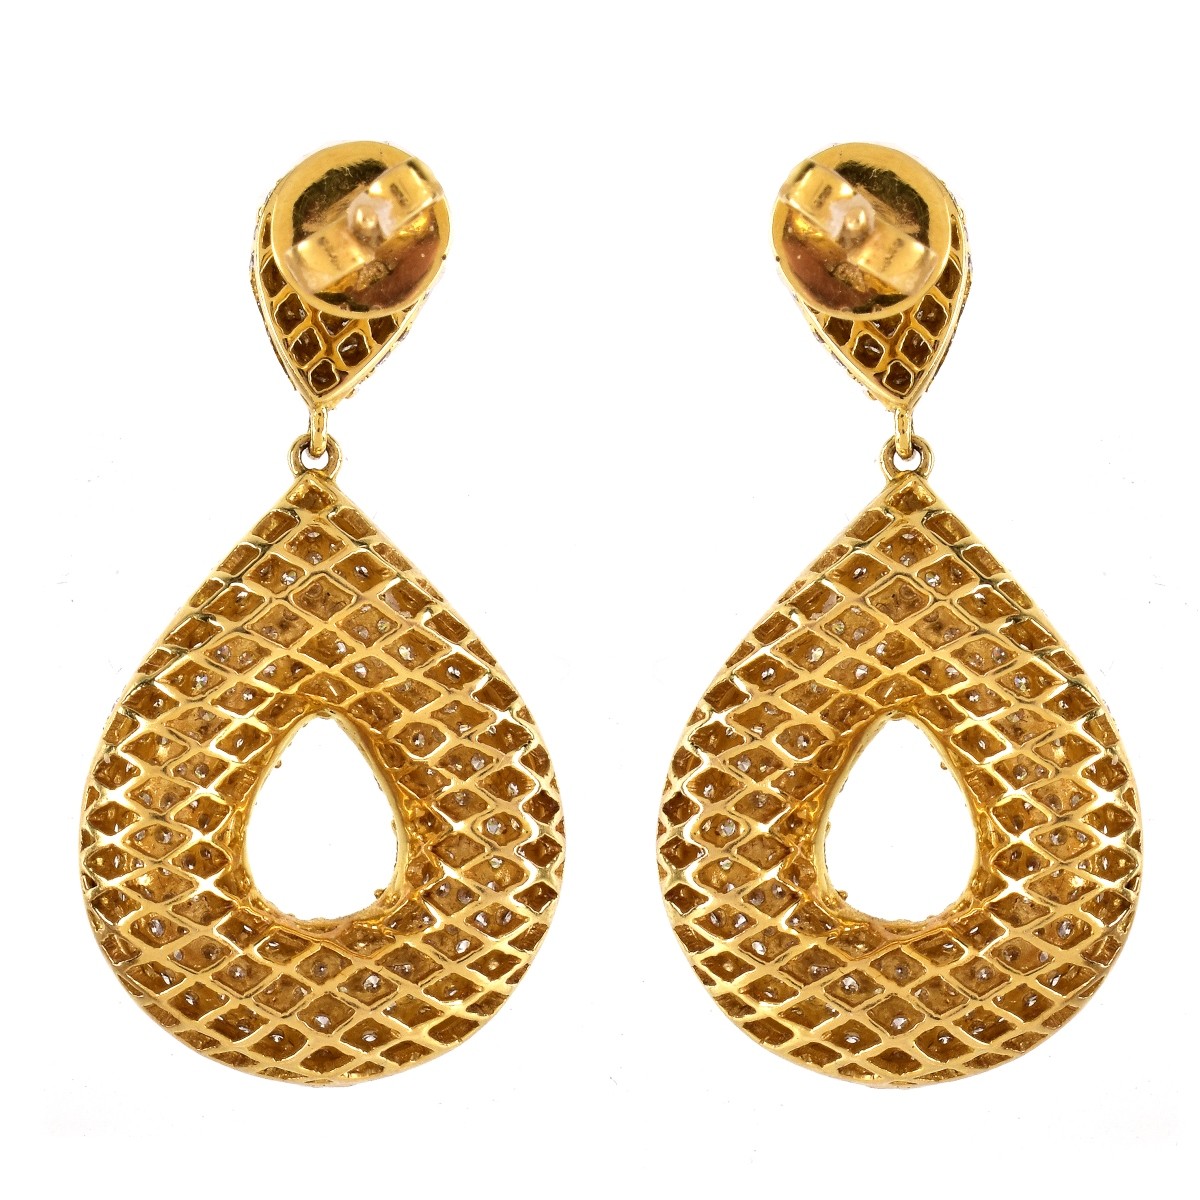 Diamond and 14K Gold Earrings - Image 3 of 5